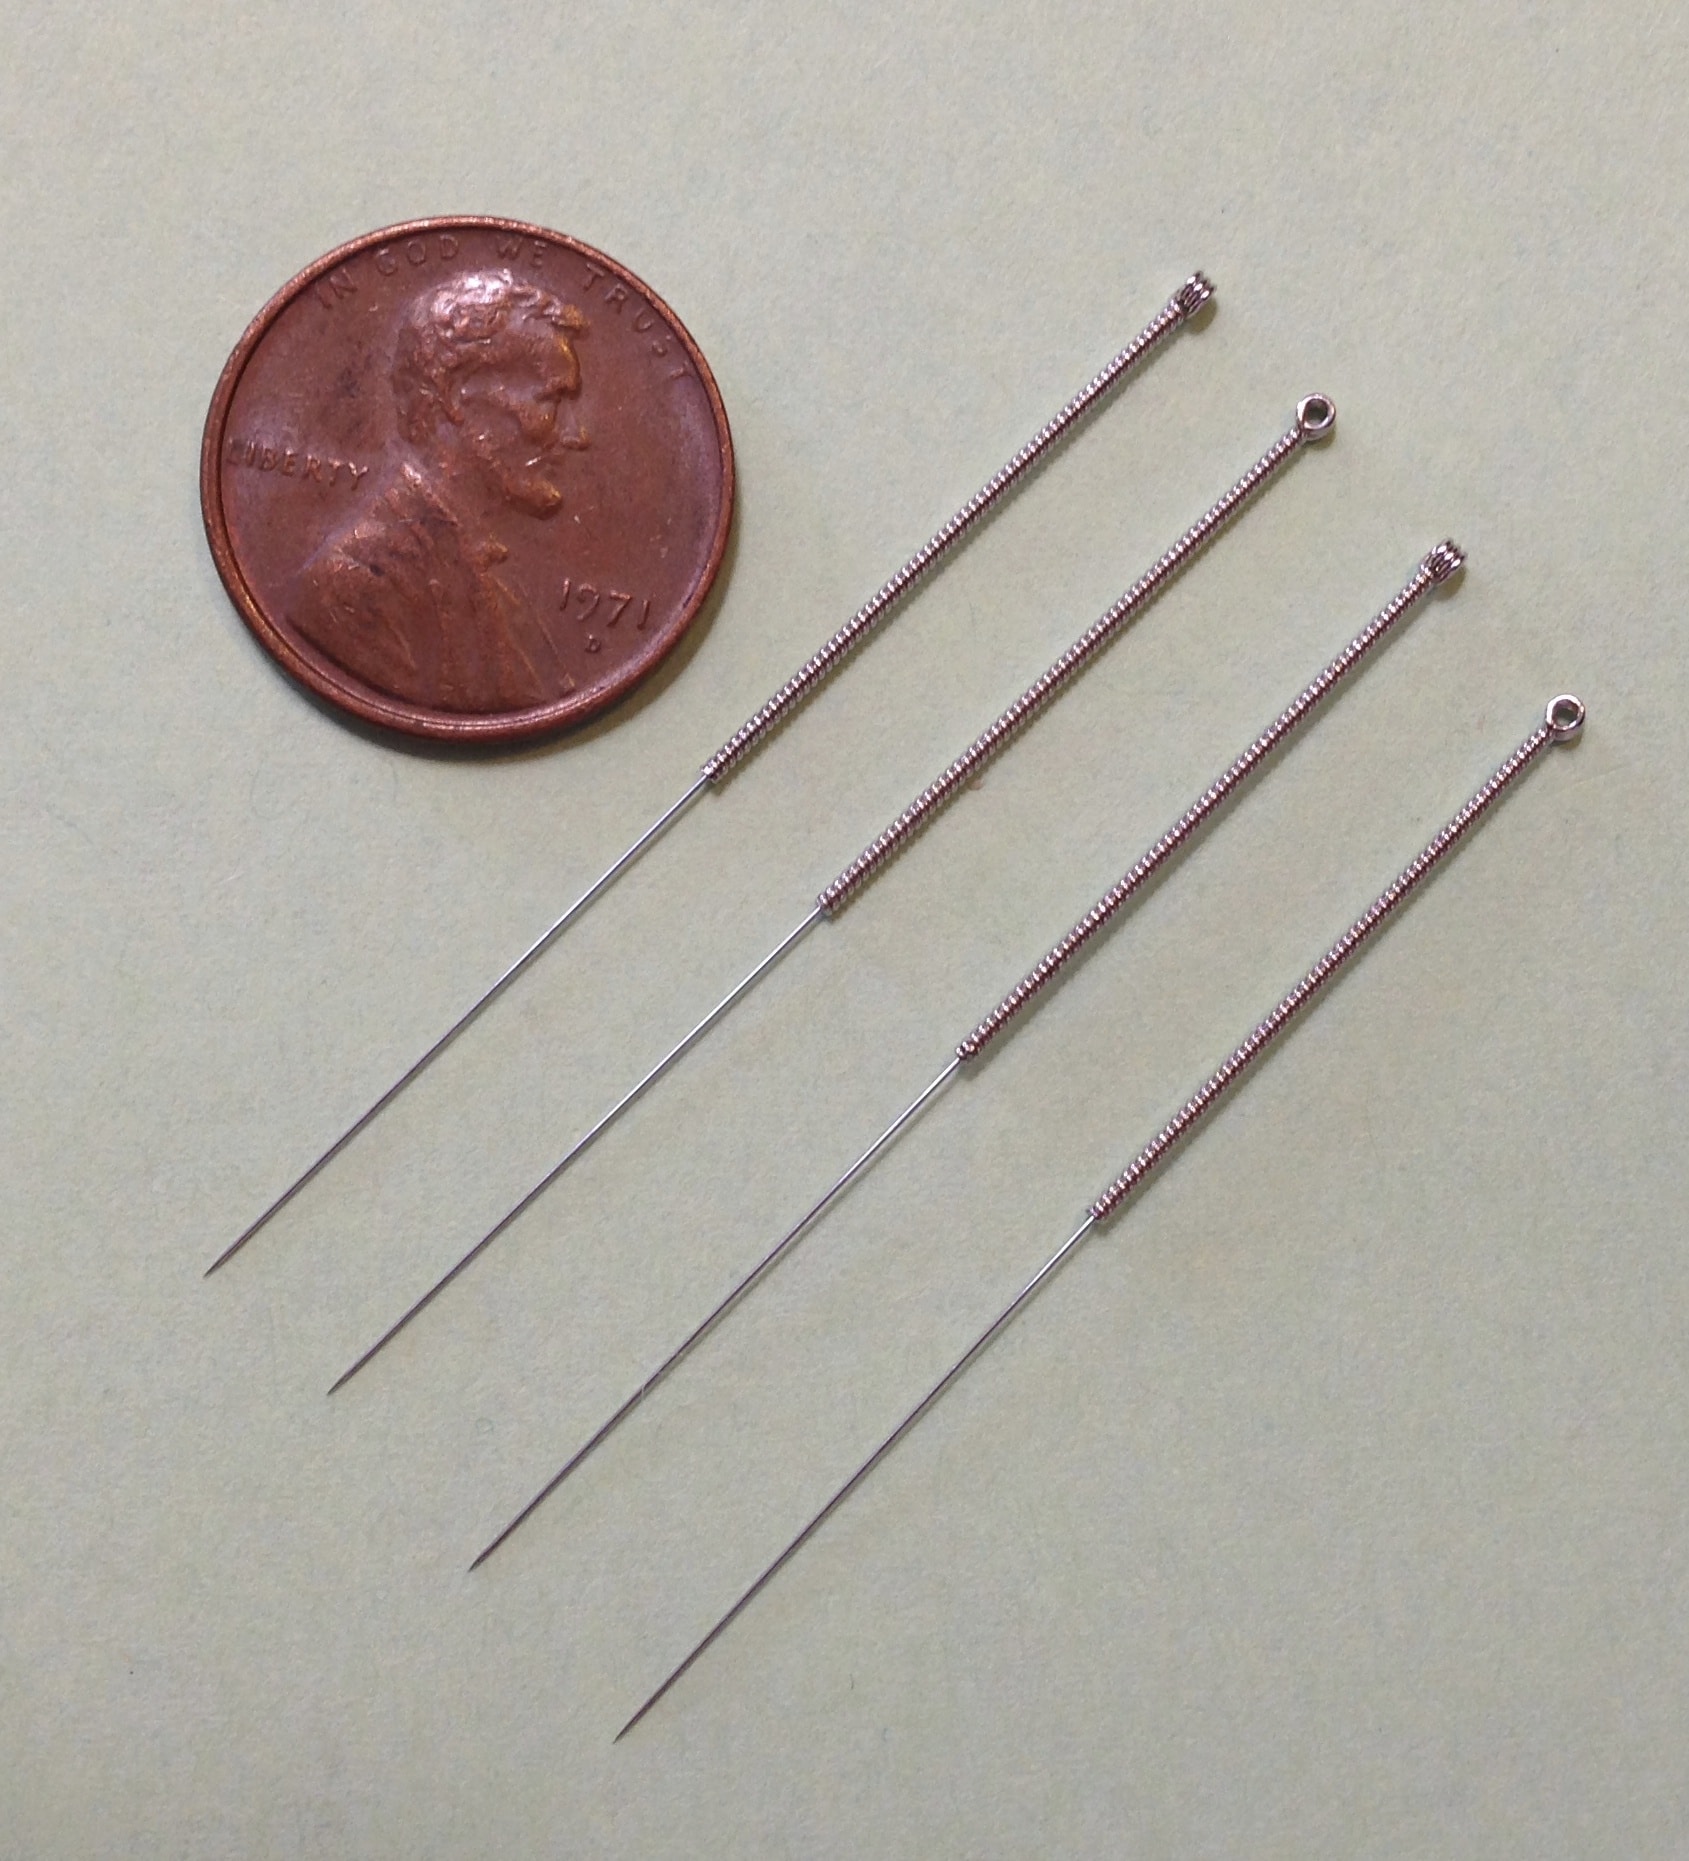 Acupuncture needles size compared to a penny